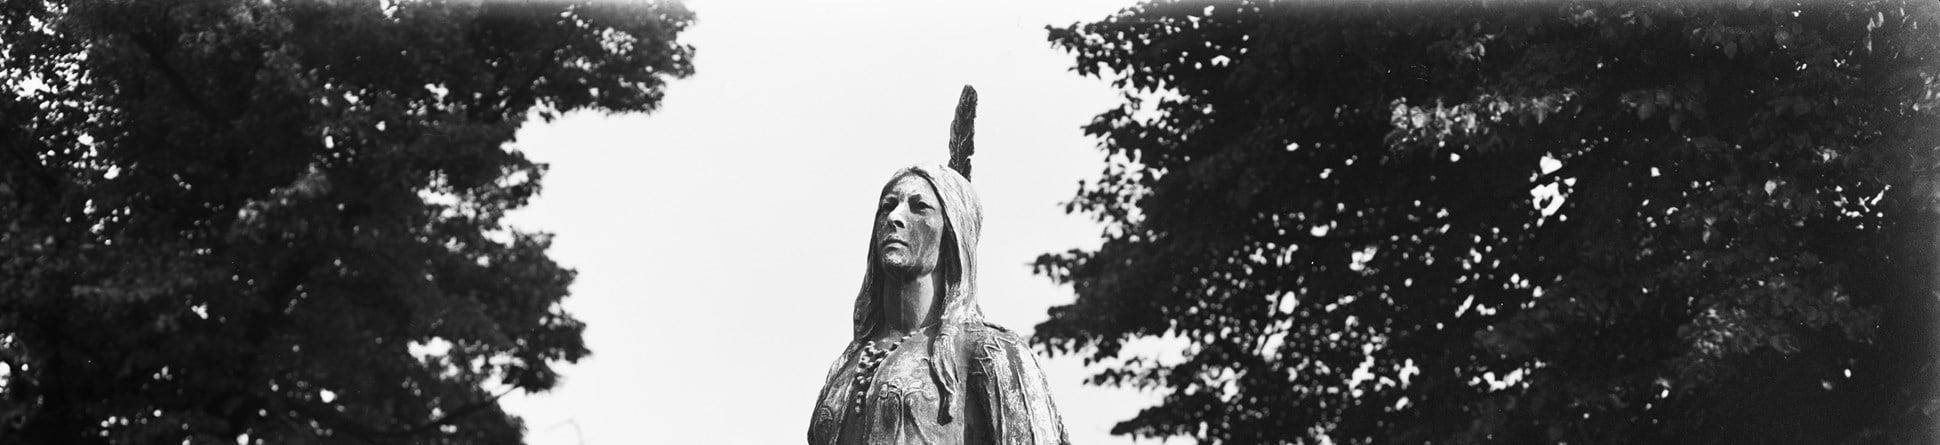 Archive image of the Pocahontas statue which has been relisted to mark 400 years since Pocahontas' death